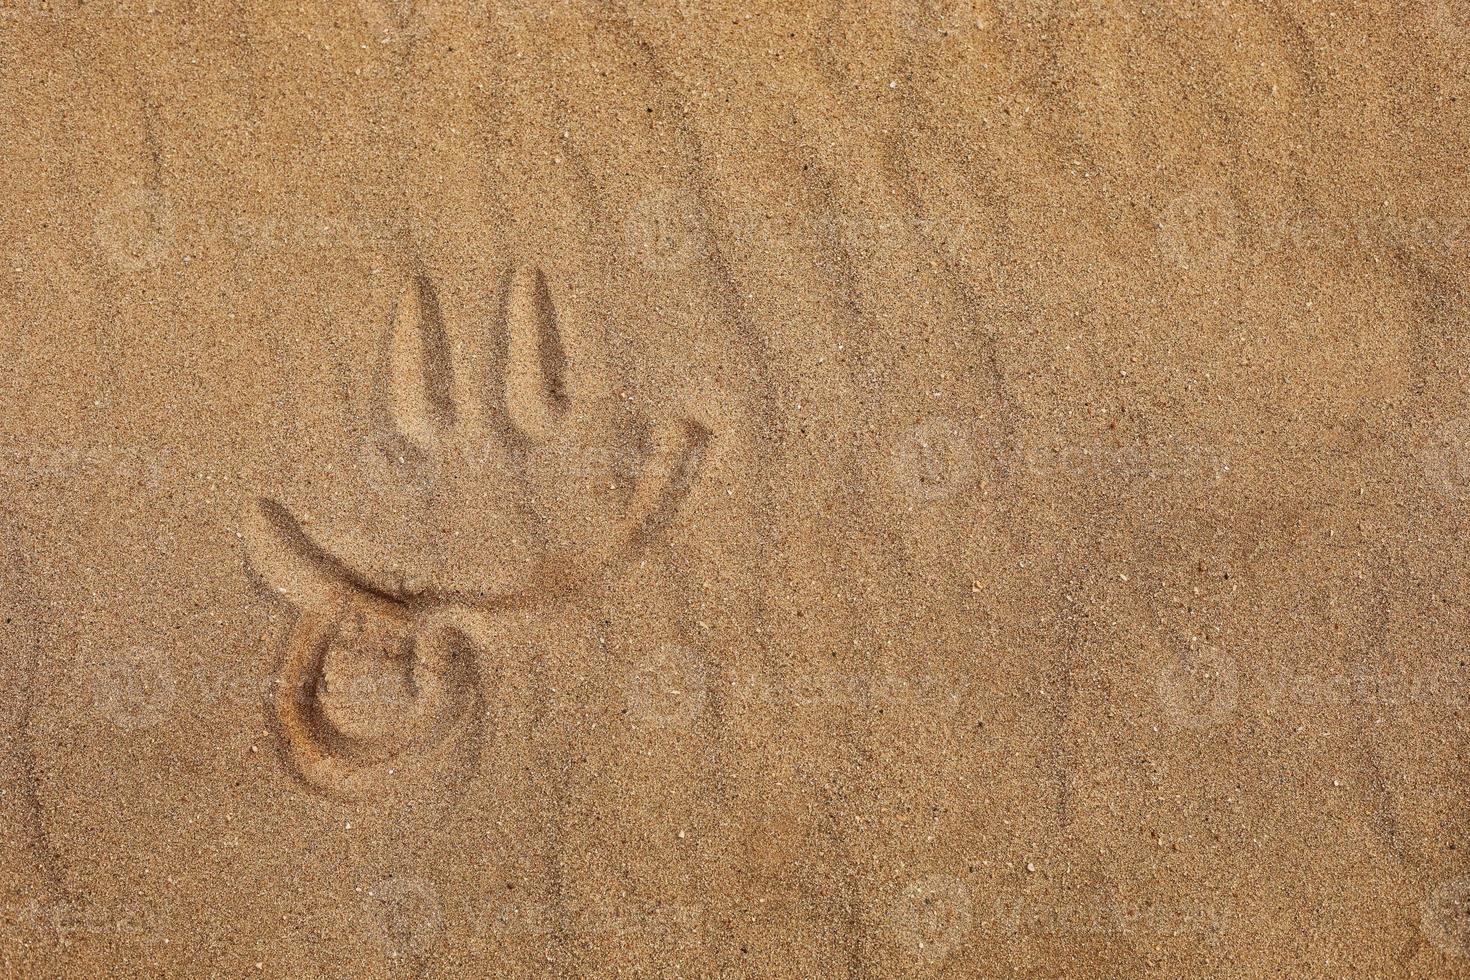 Smiley face with tongue out made by finger on a sandy beach photo